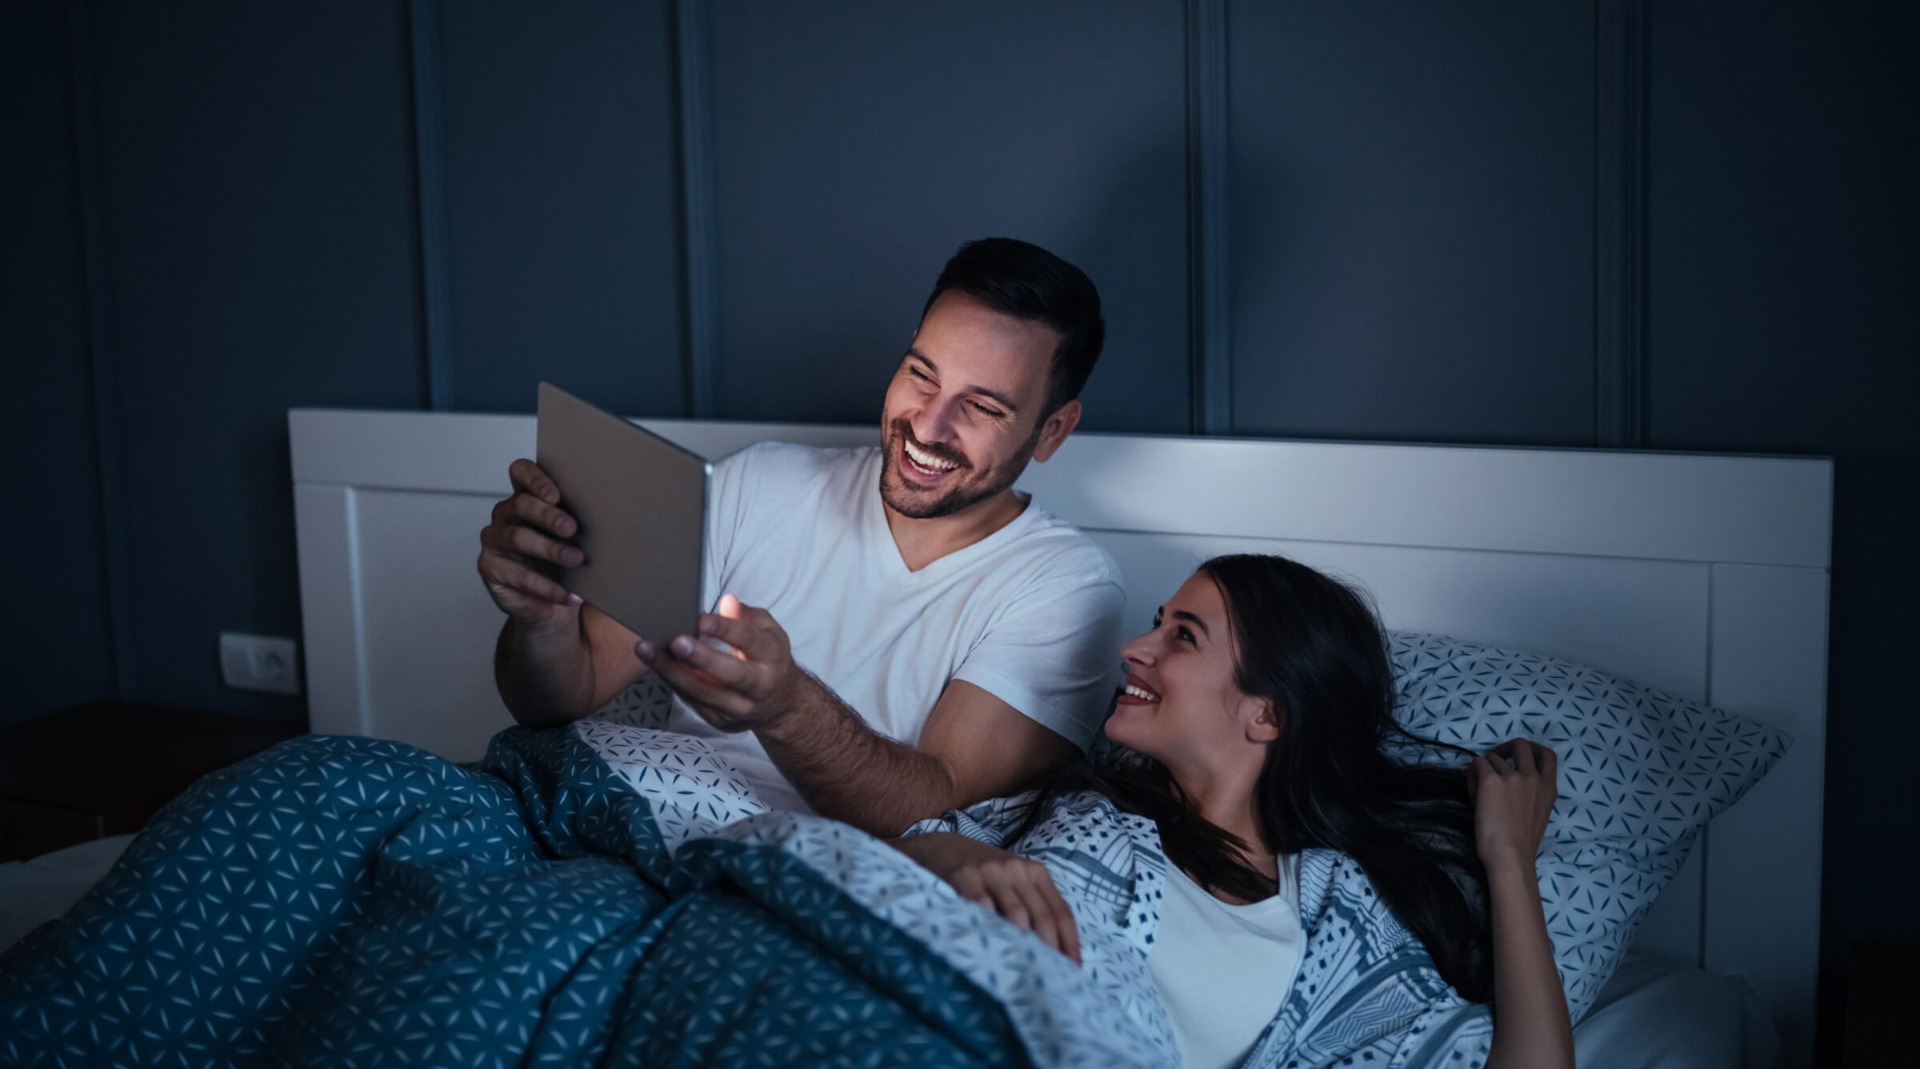 A couple sitting together and using their mobile devices in bed